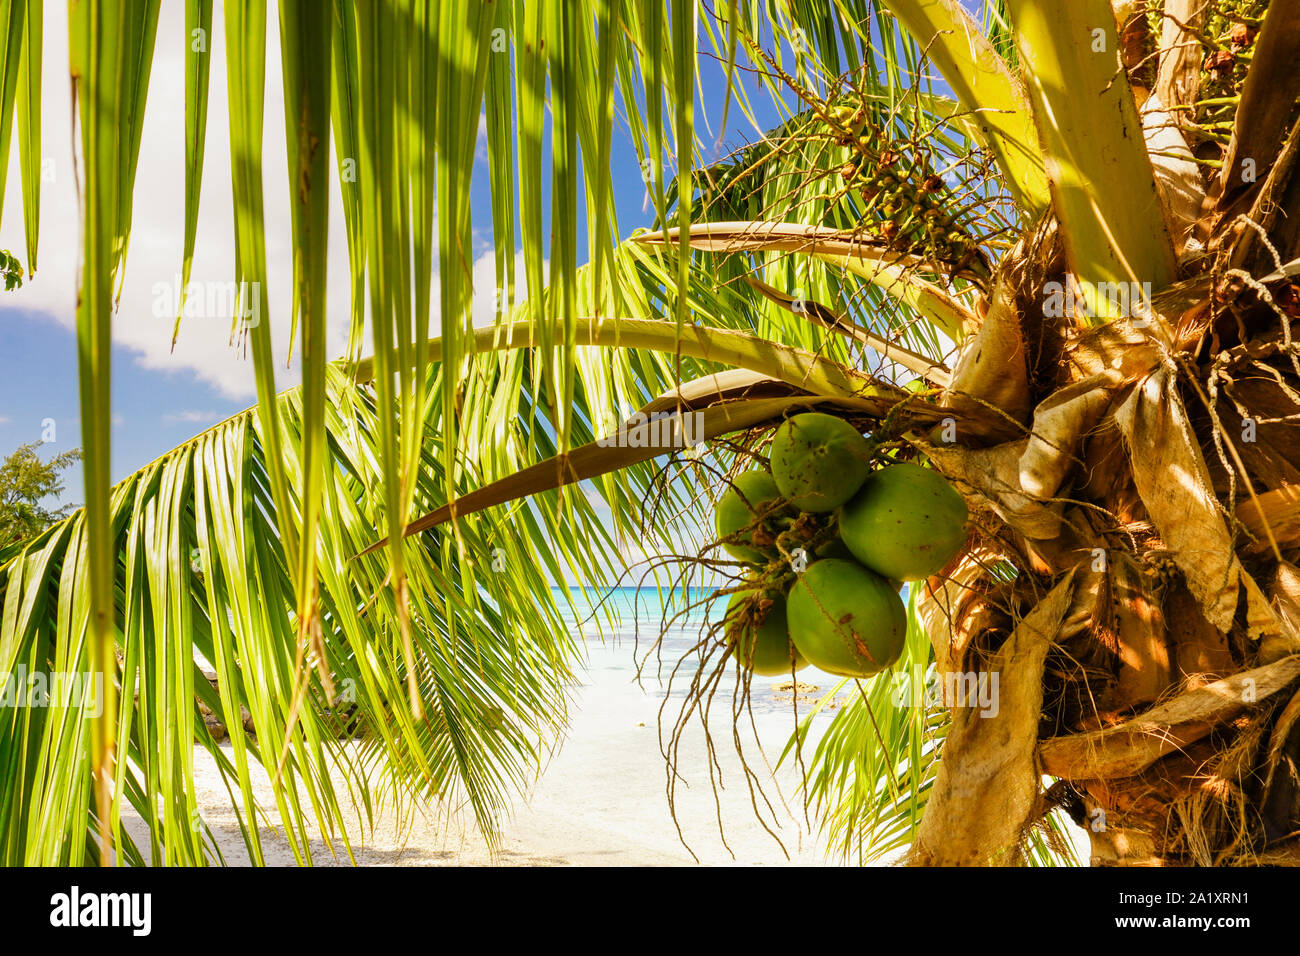 Coconuts hang from a palm tree on a sandy beach in paradise with the ocean in the background Stock Photo